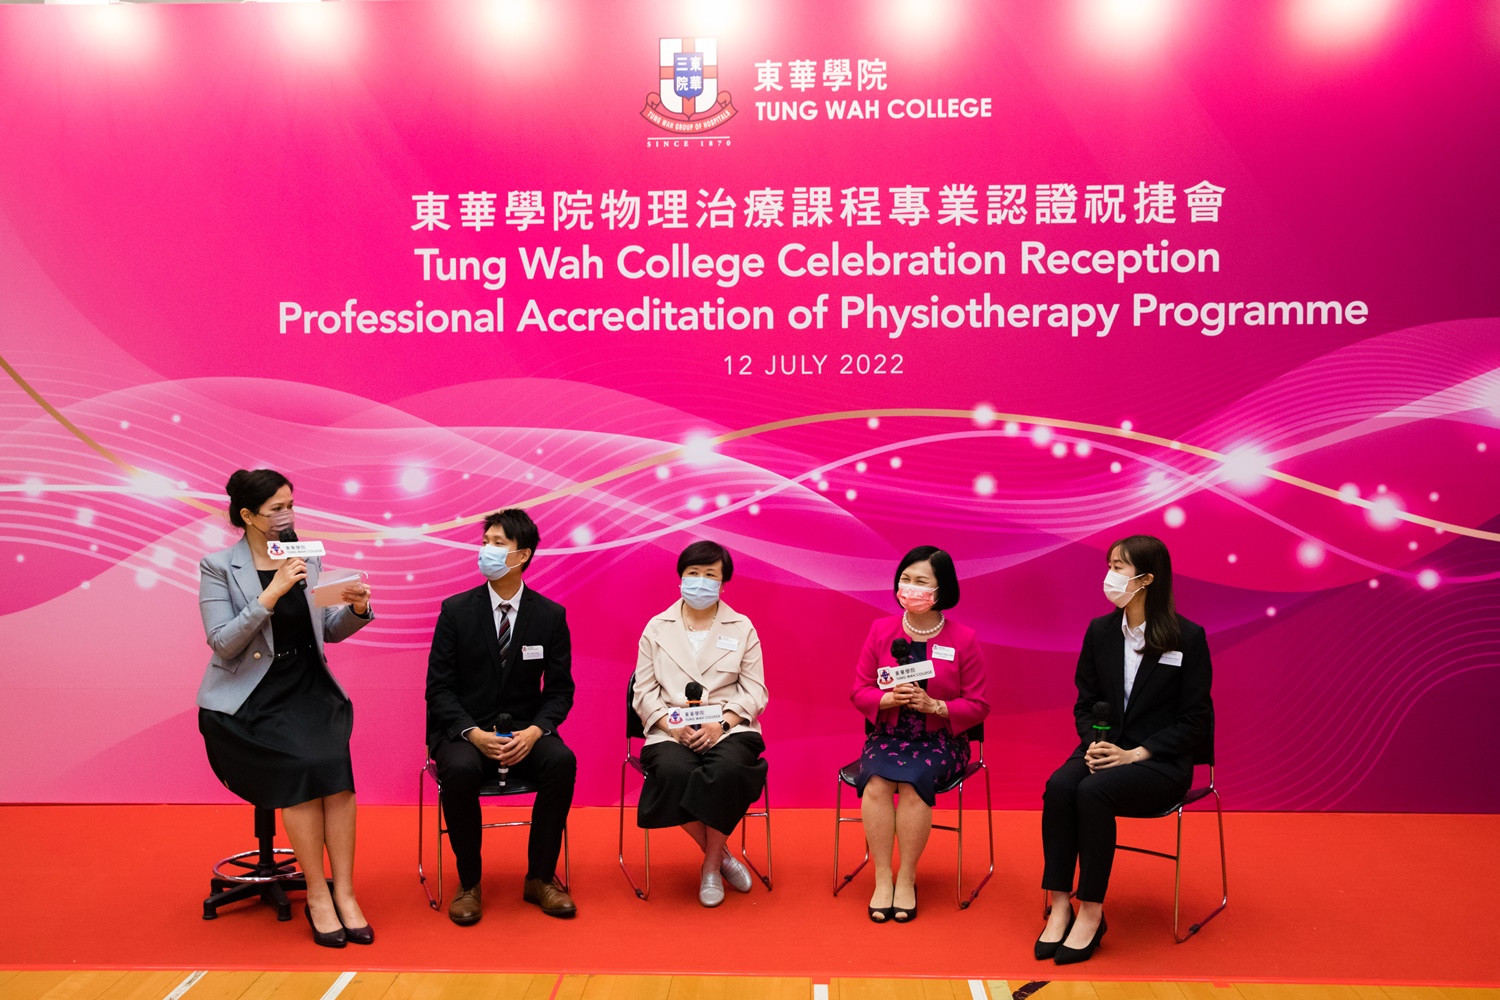 A sharing session with Luka Chow, fresh graduate of the Programme (left 2), Professor Grace Szeto Pui-yuk (middle), Professor Sally Chan (right 2) and Rexanna Chan (right 1).